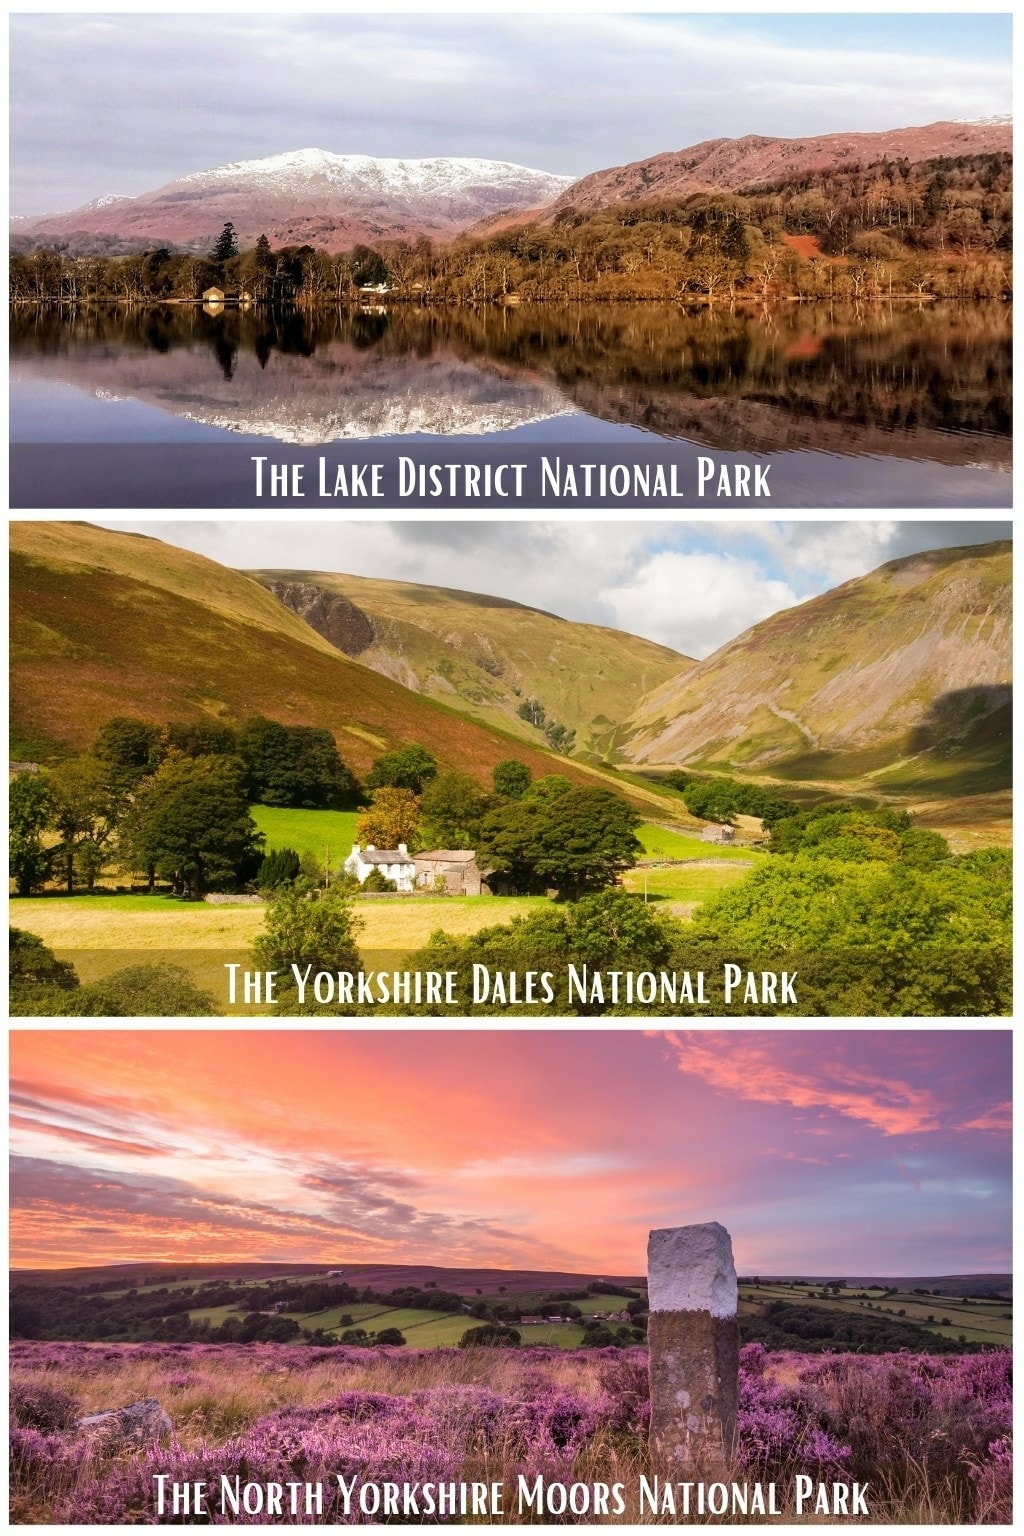 National parks on the Coast to Coast walk route